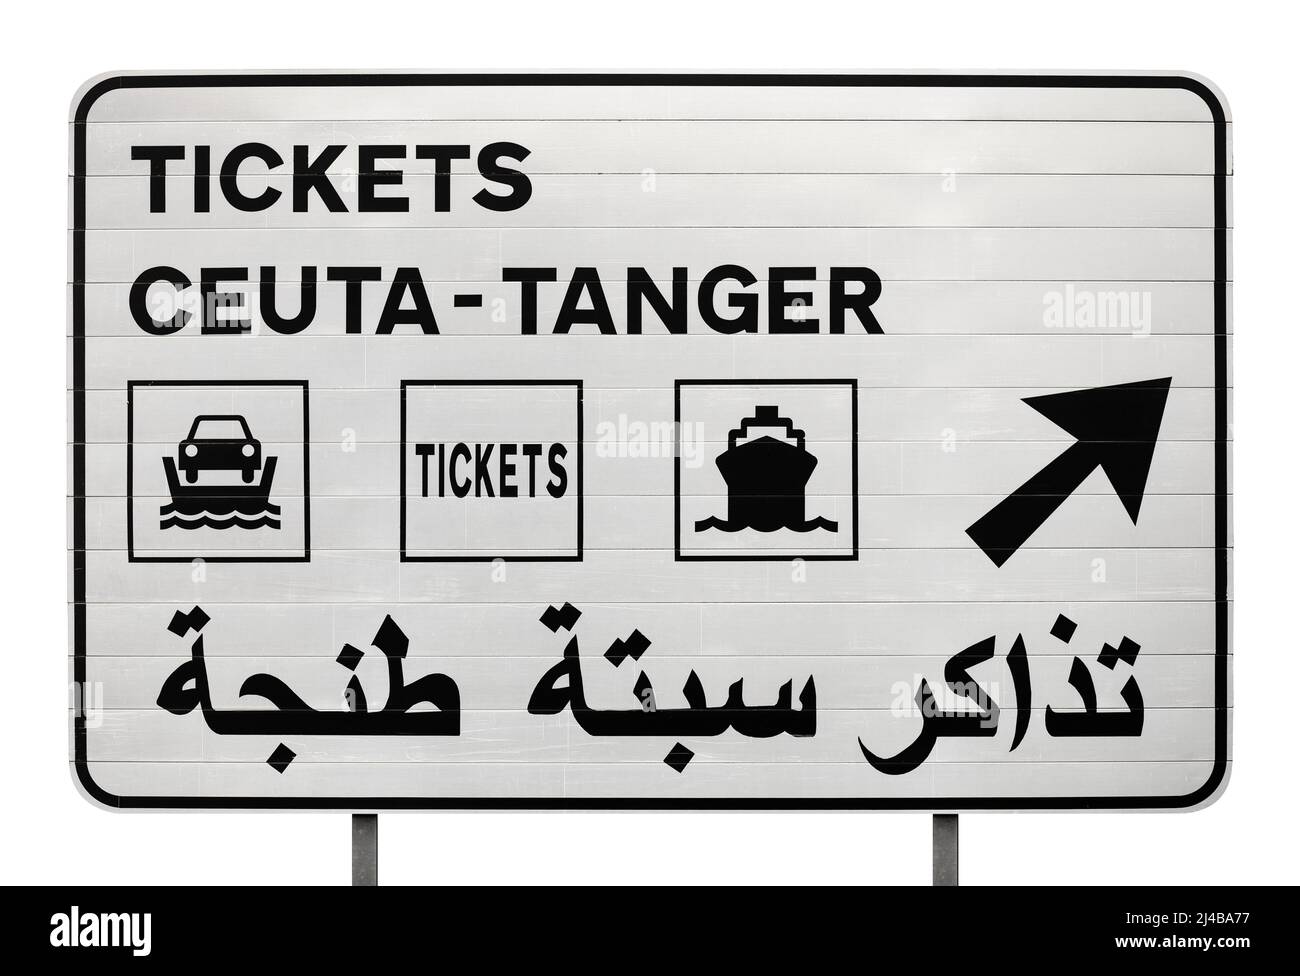 Ceuta - tanger tickets sign for ferry boat ship ticket crossing shipping cruise passage route connection Stock Photo